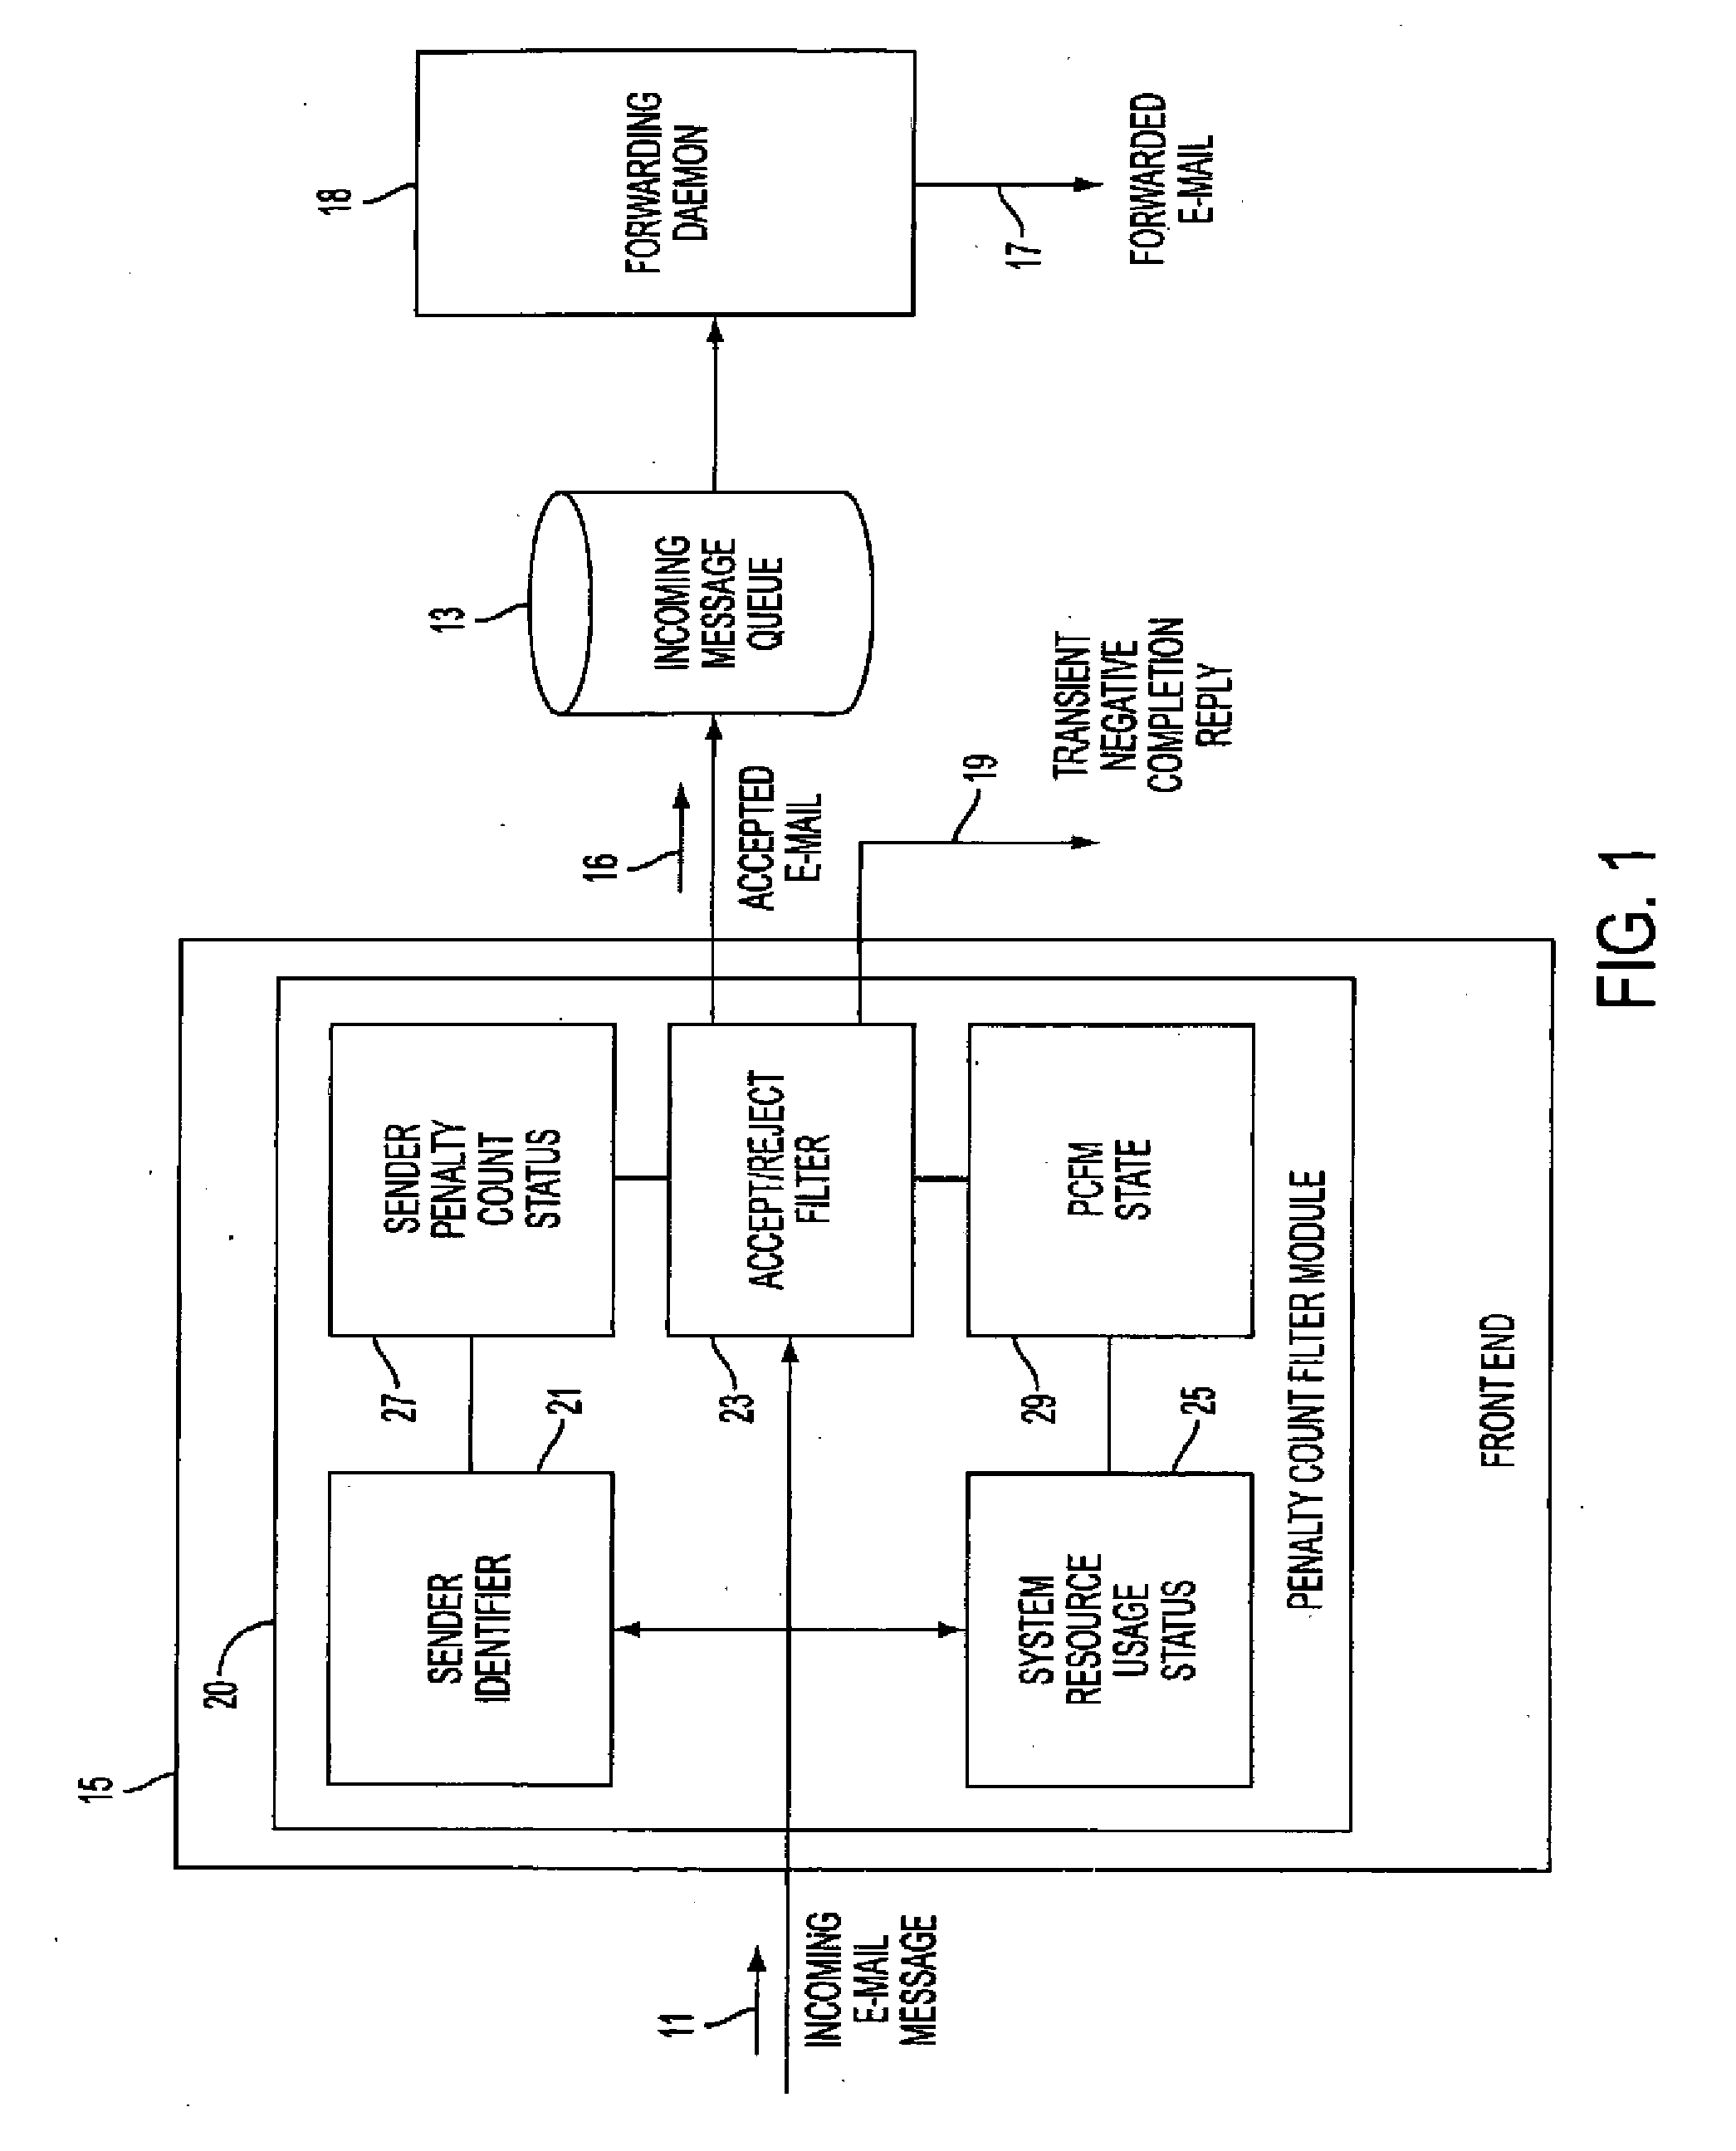 Apparatus and Method for Handling Electronic Mail